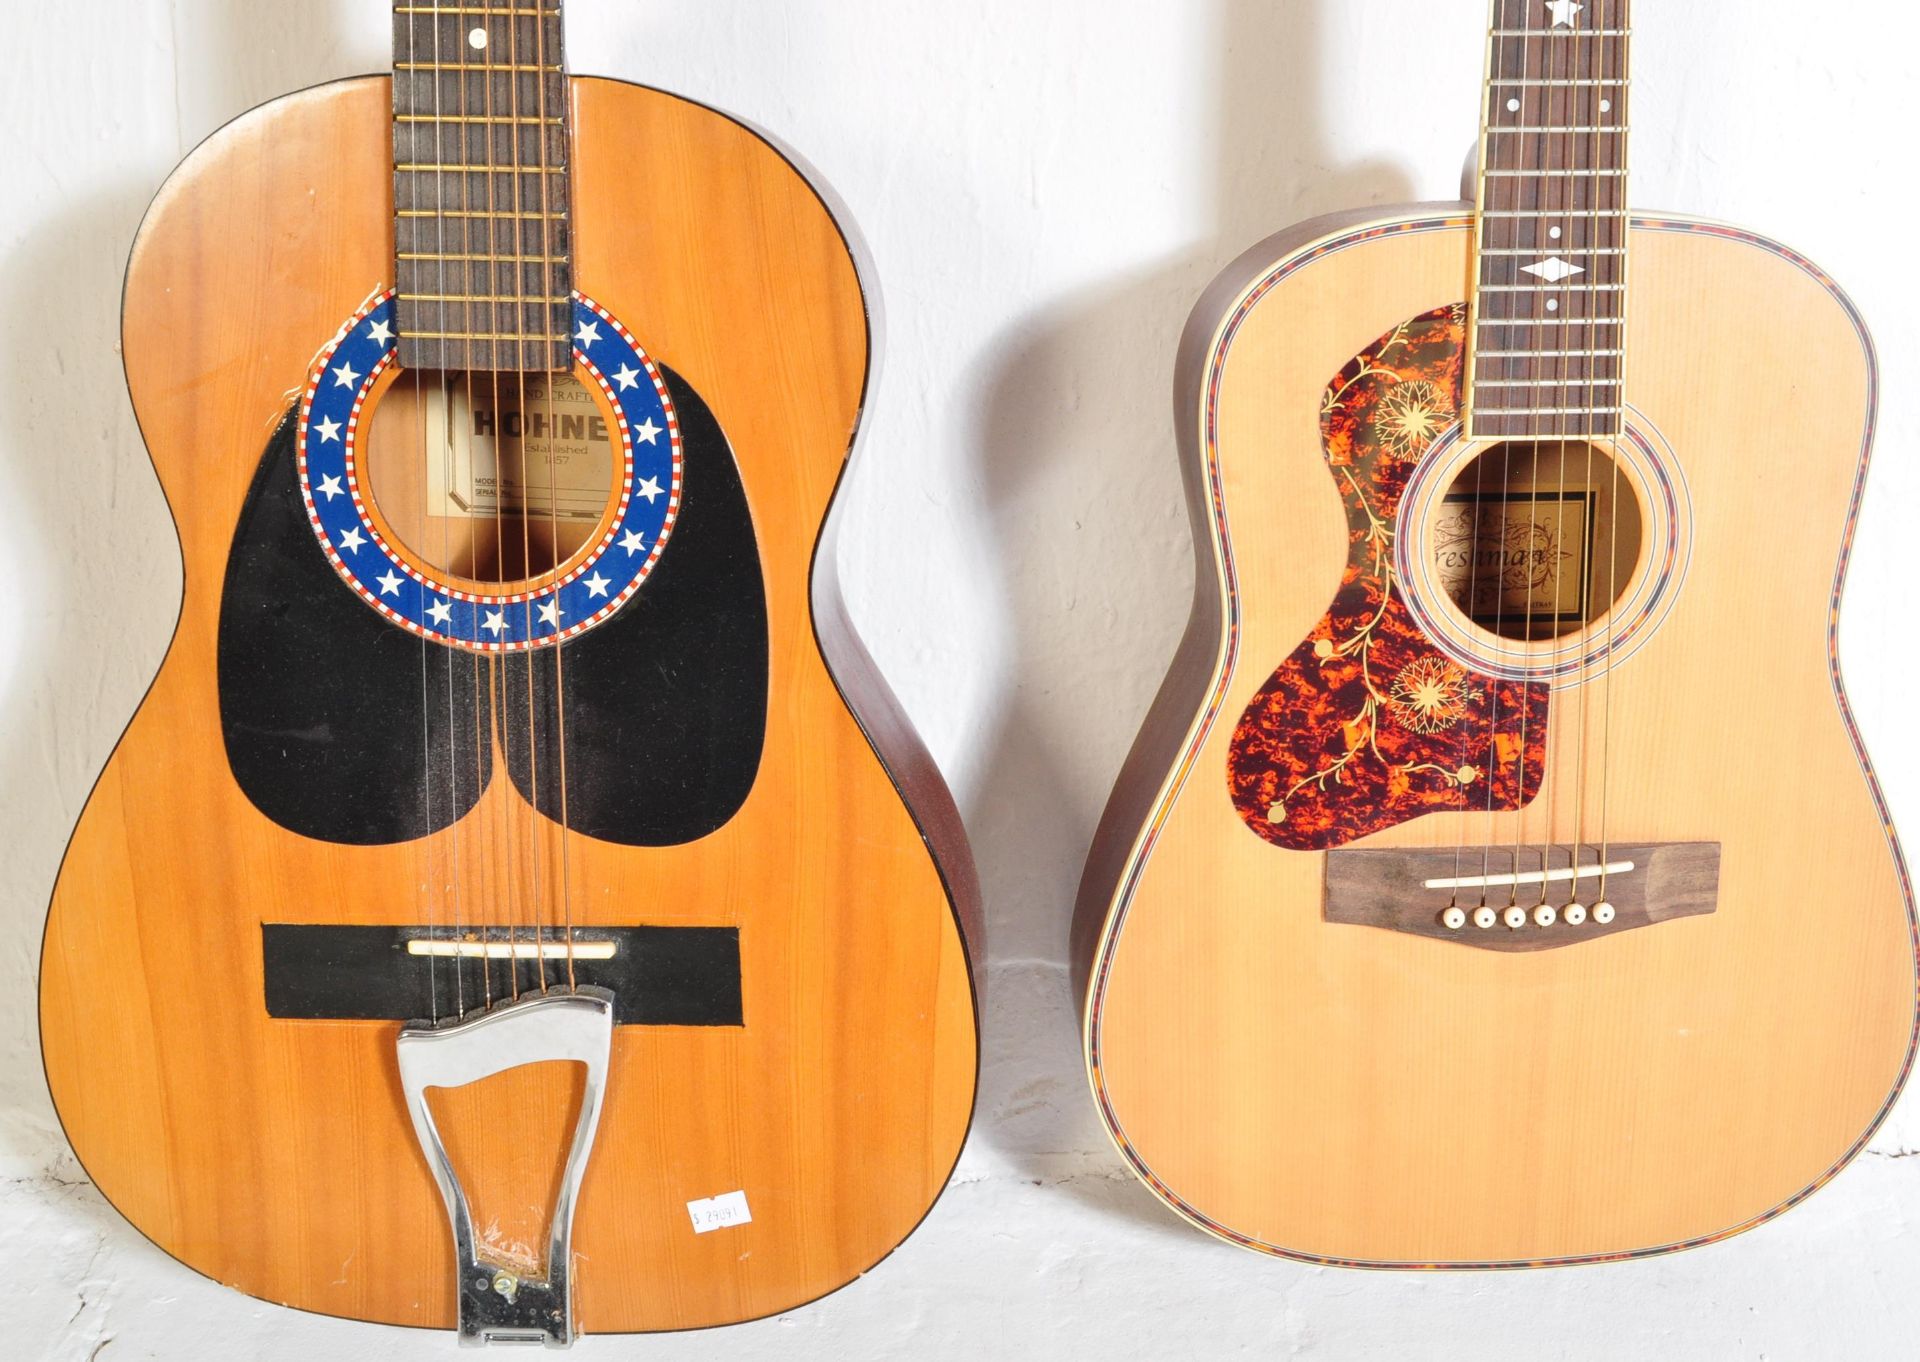 TWO RETRO VINTAGE ACOUSTIC GUITARS - Image 3 of 6